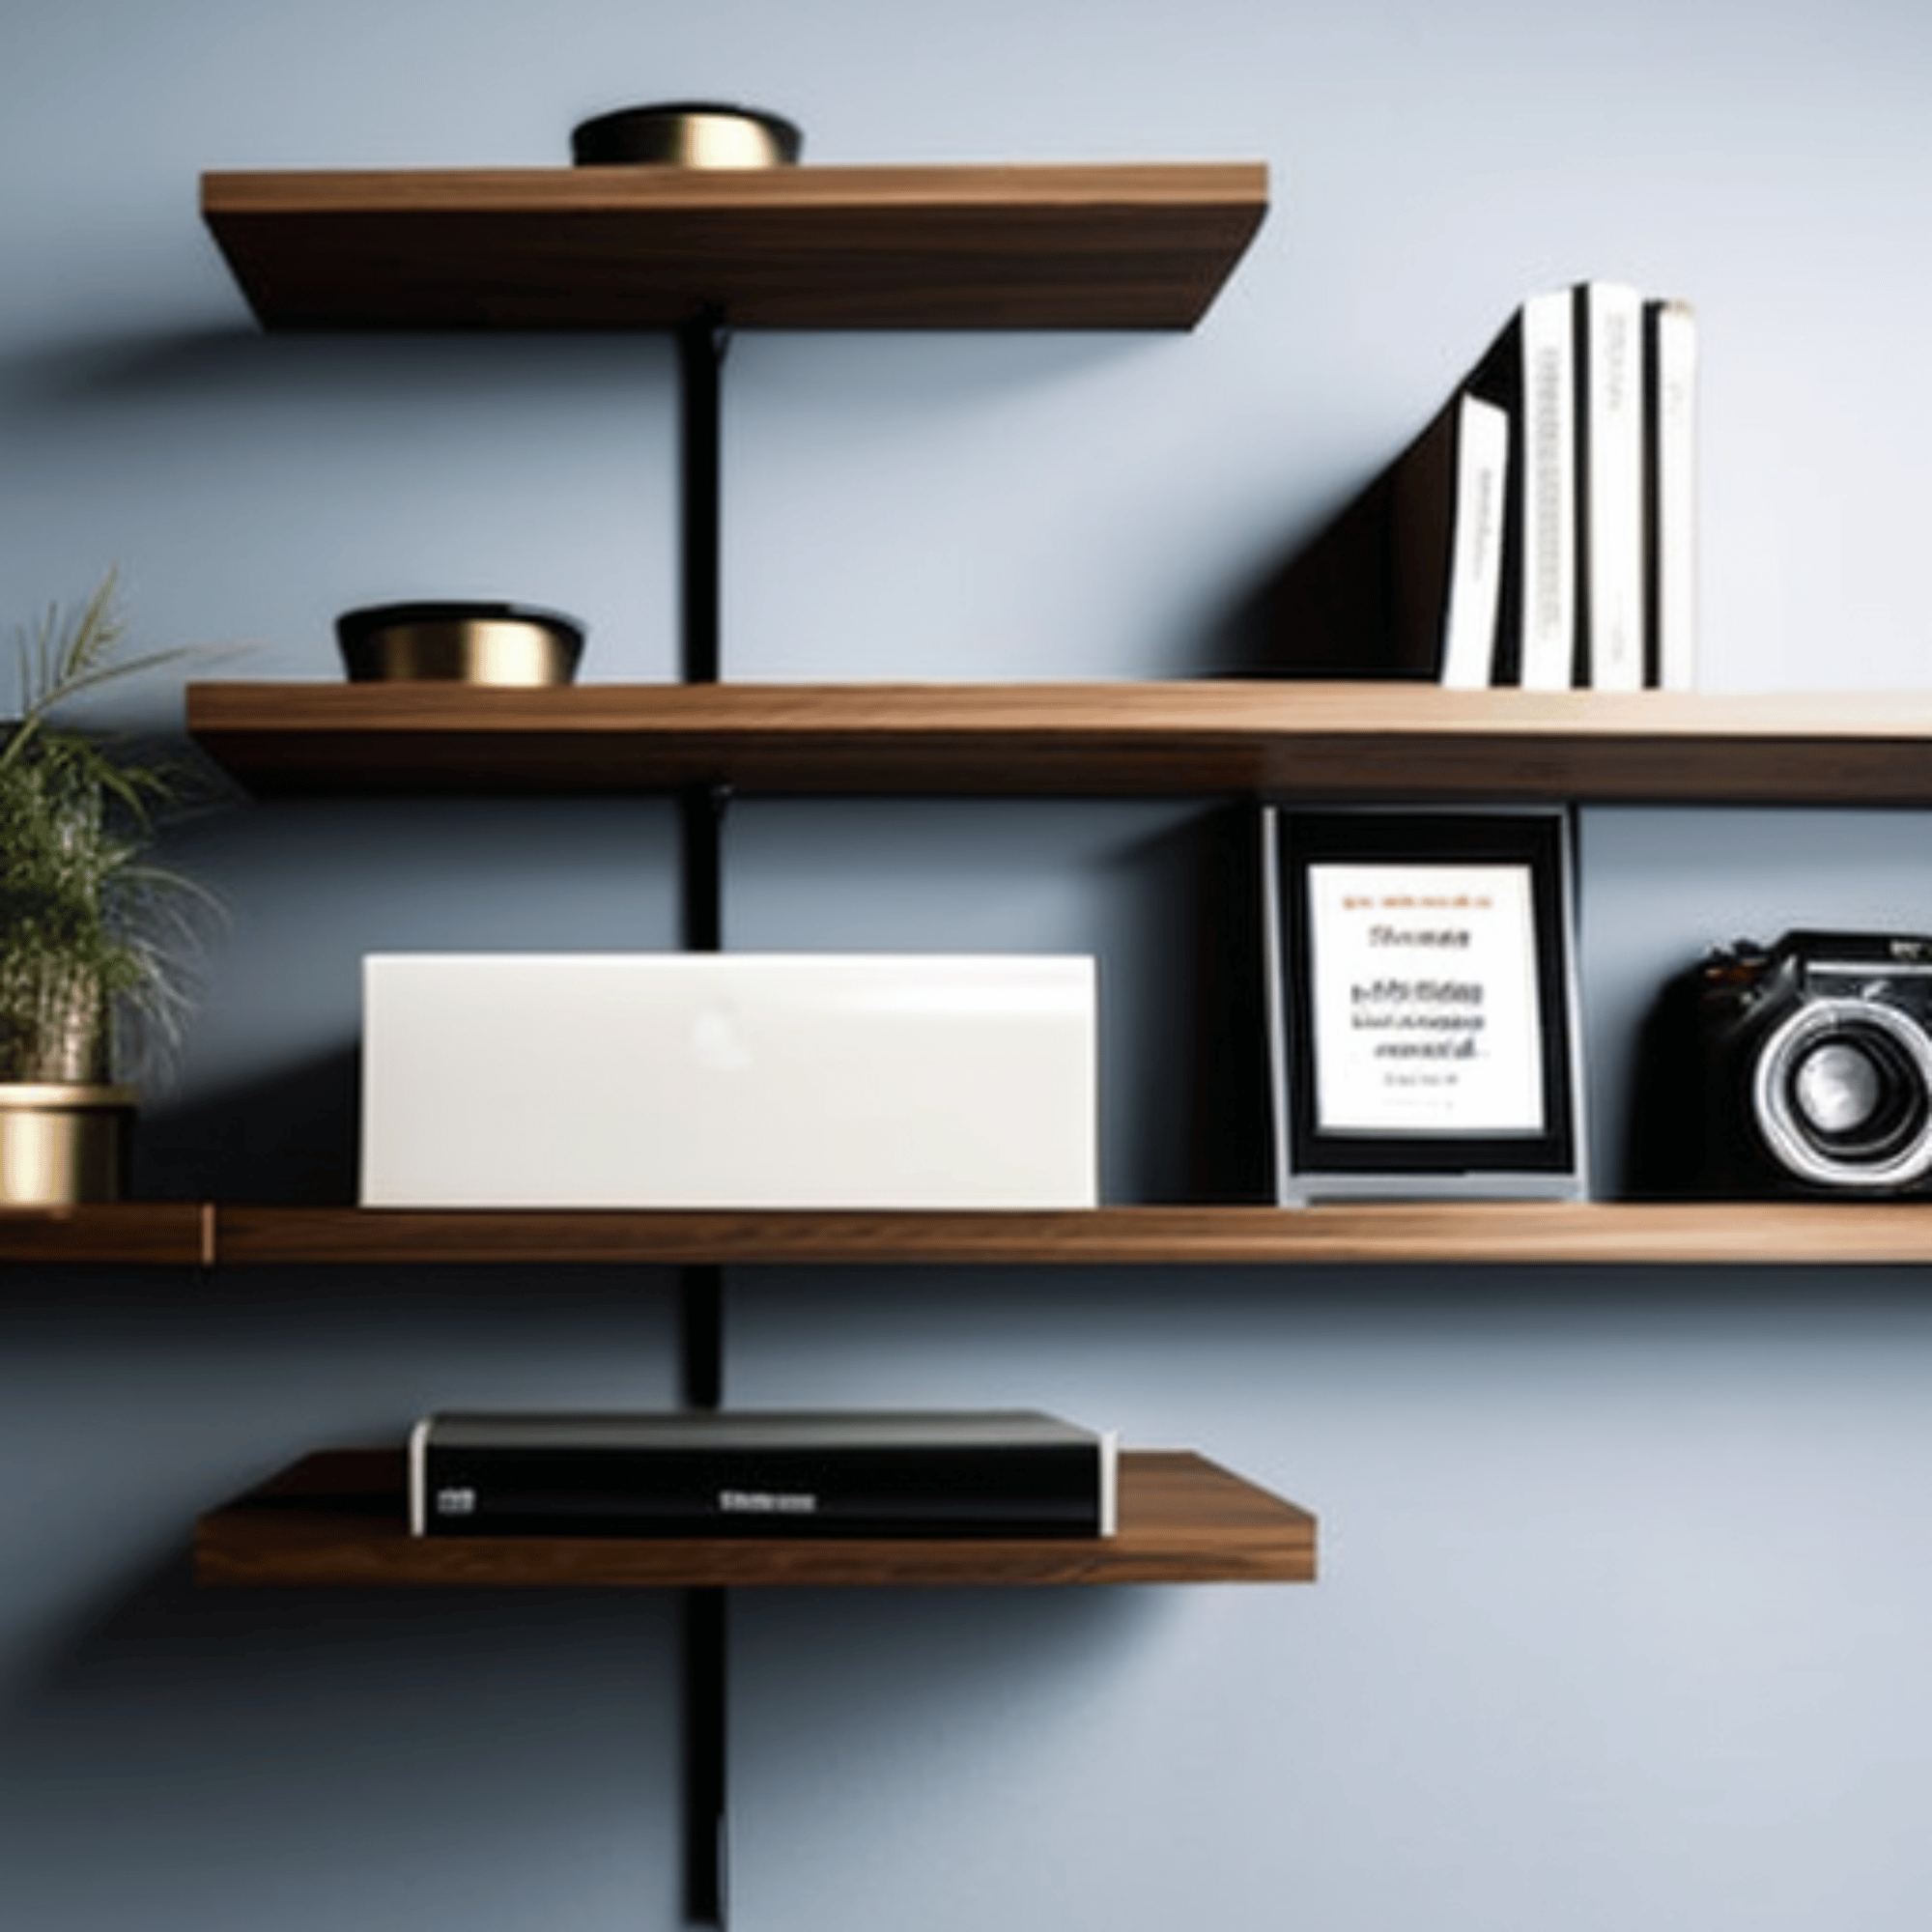 A close-up photo of a wall-mounted shelf system with various items neatly organized